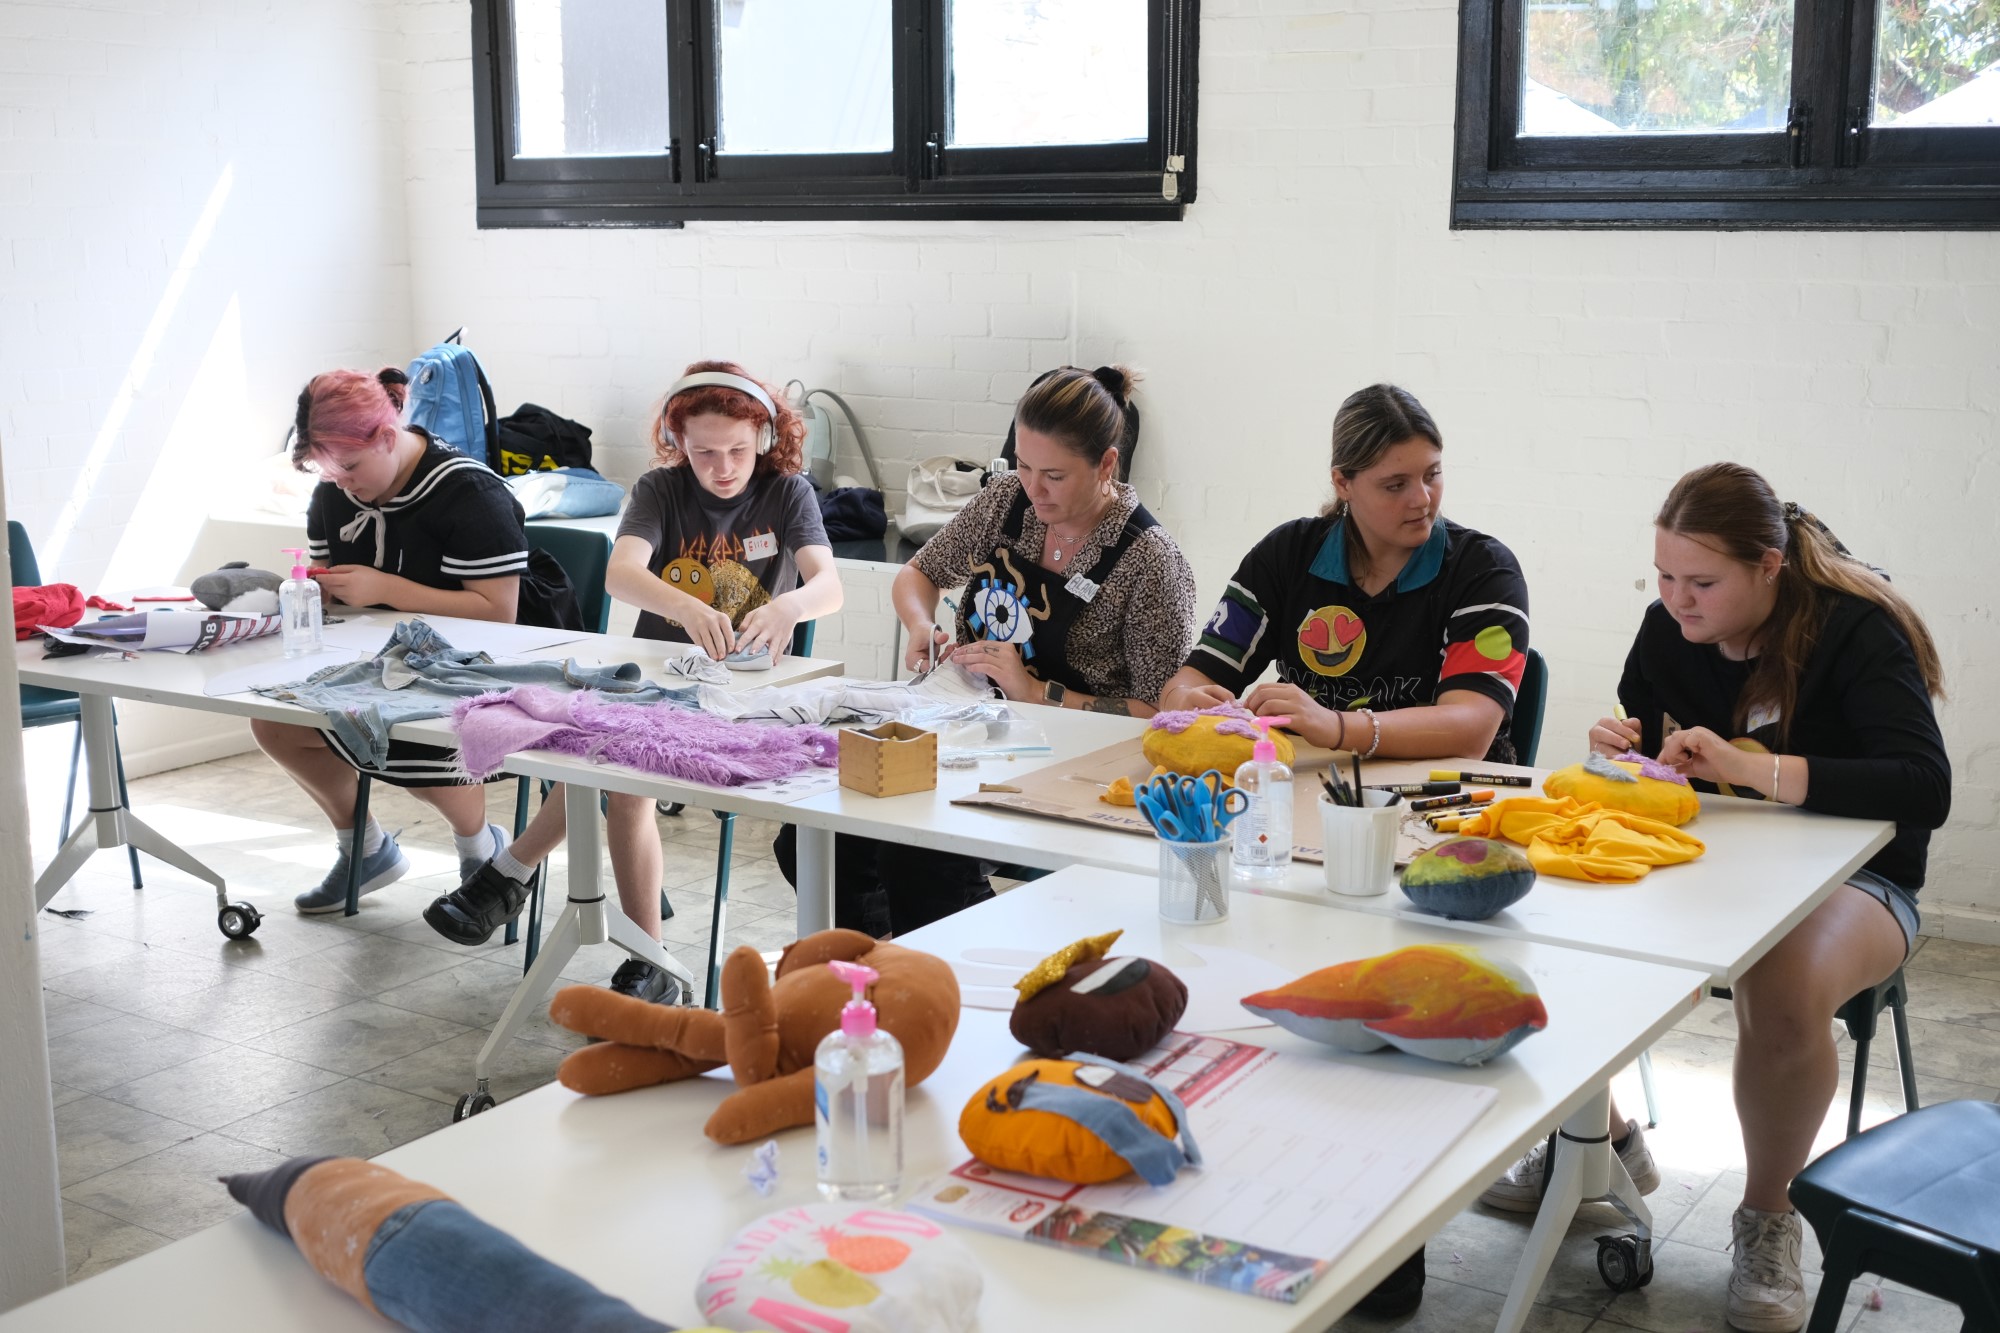 Students seated with visual arts teacher creating soft sculptural artworks from recycled materials